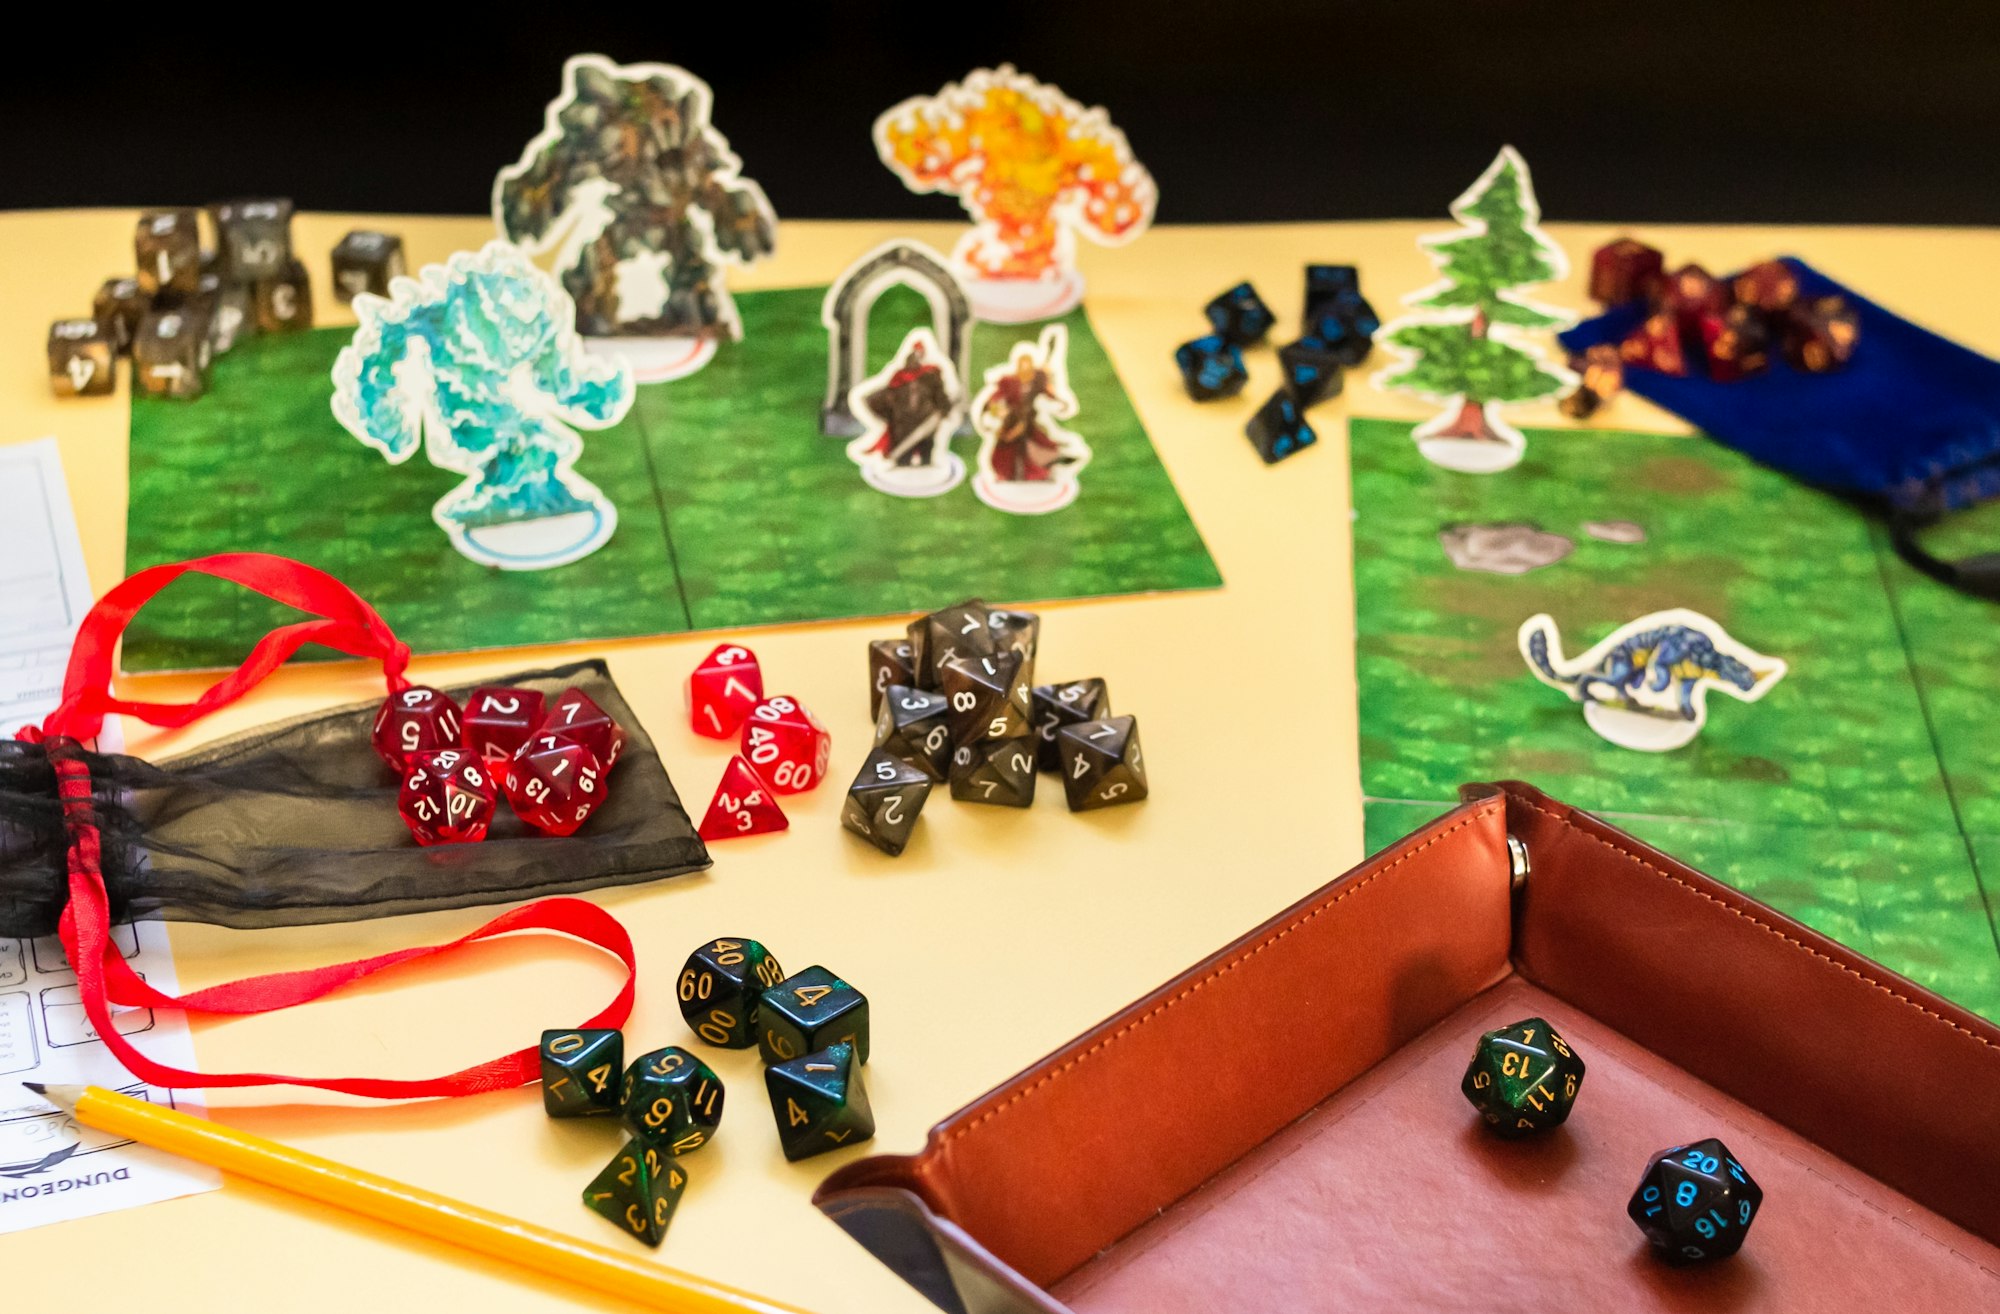 Role-playing game with sets of dices, character sheet, gaming mats, playing pieces and dice tray